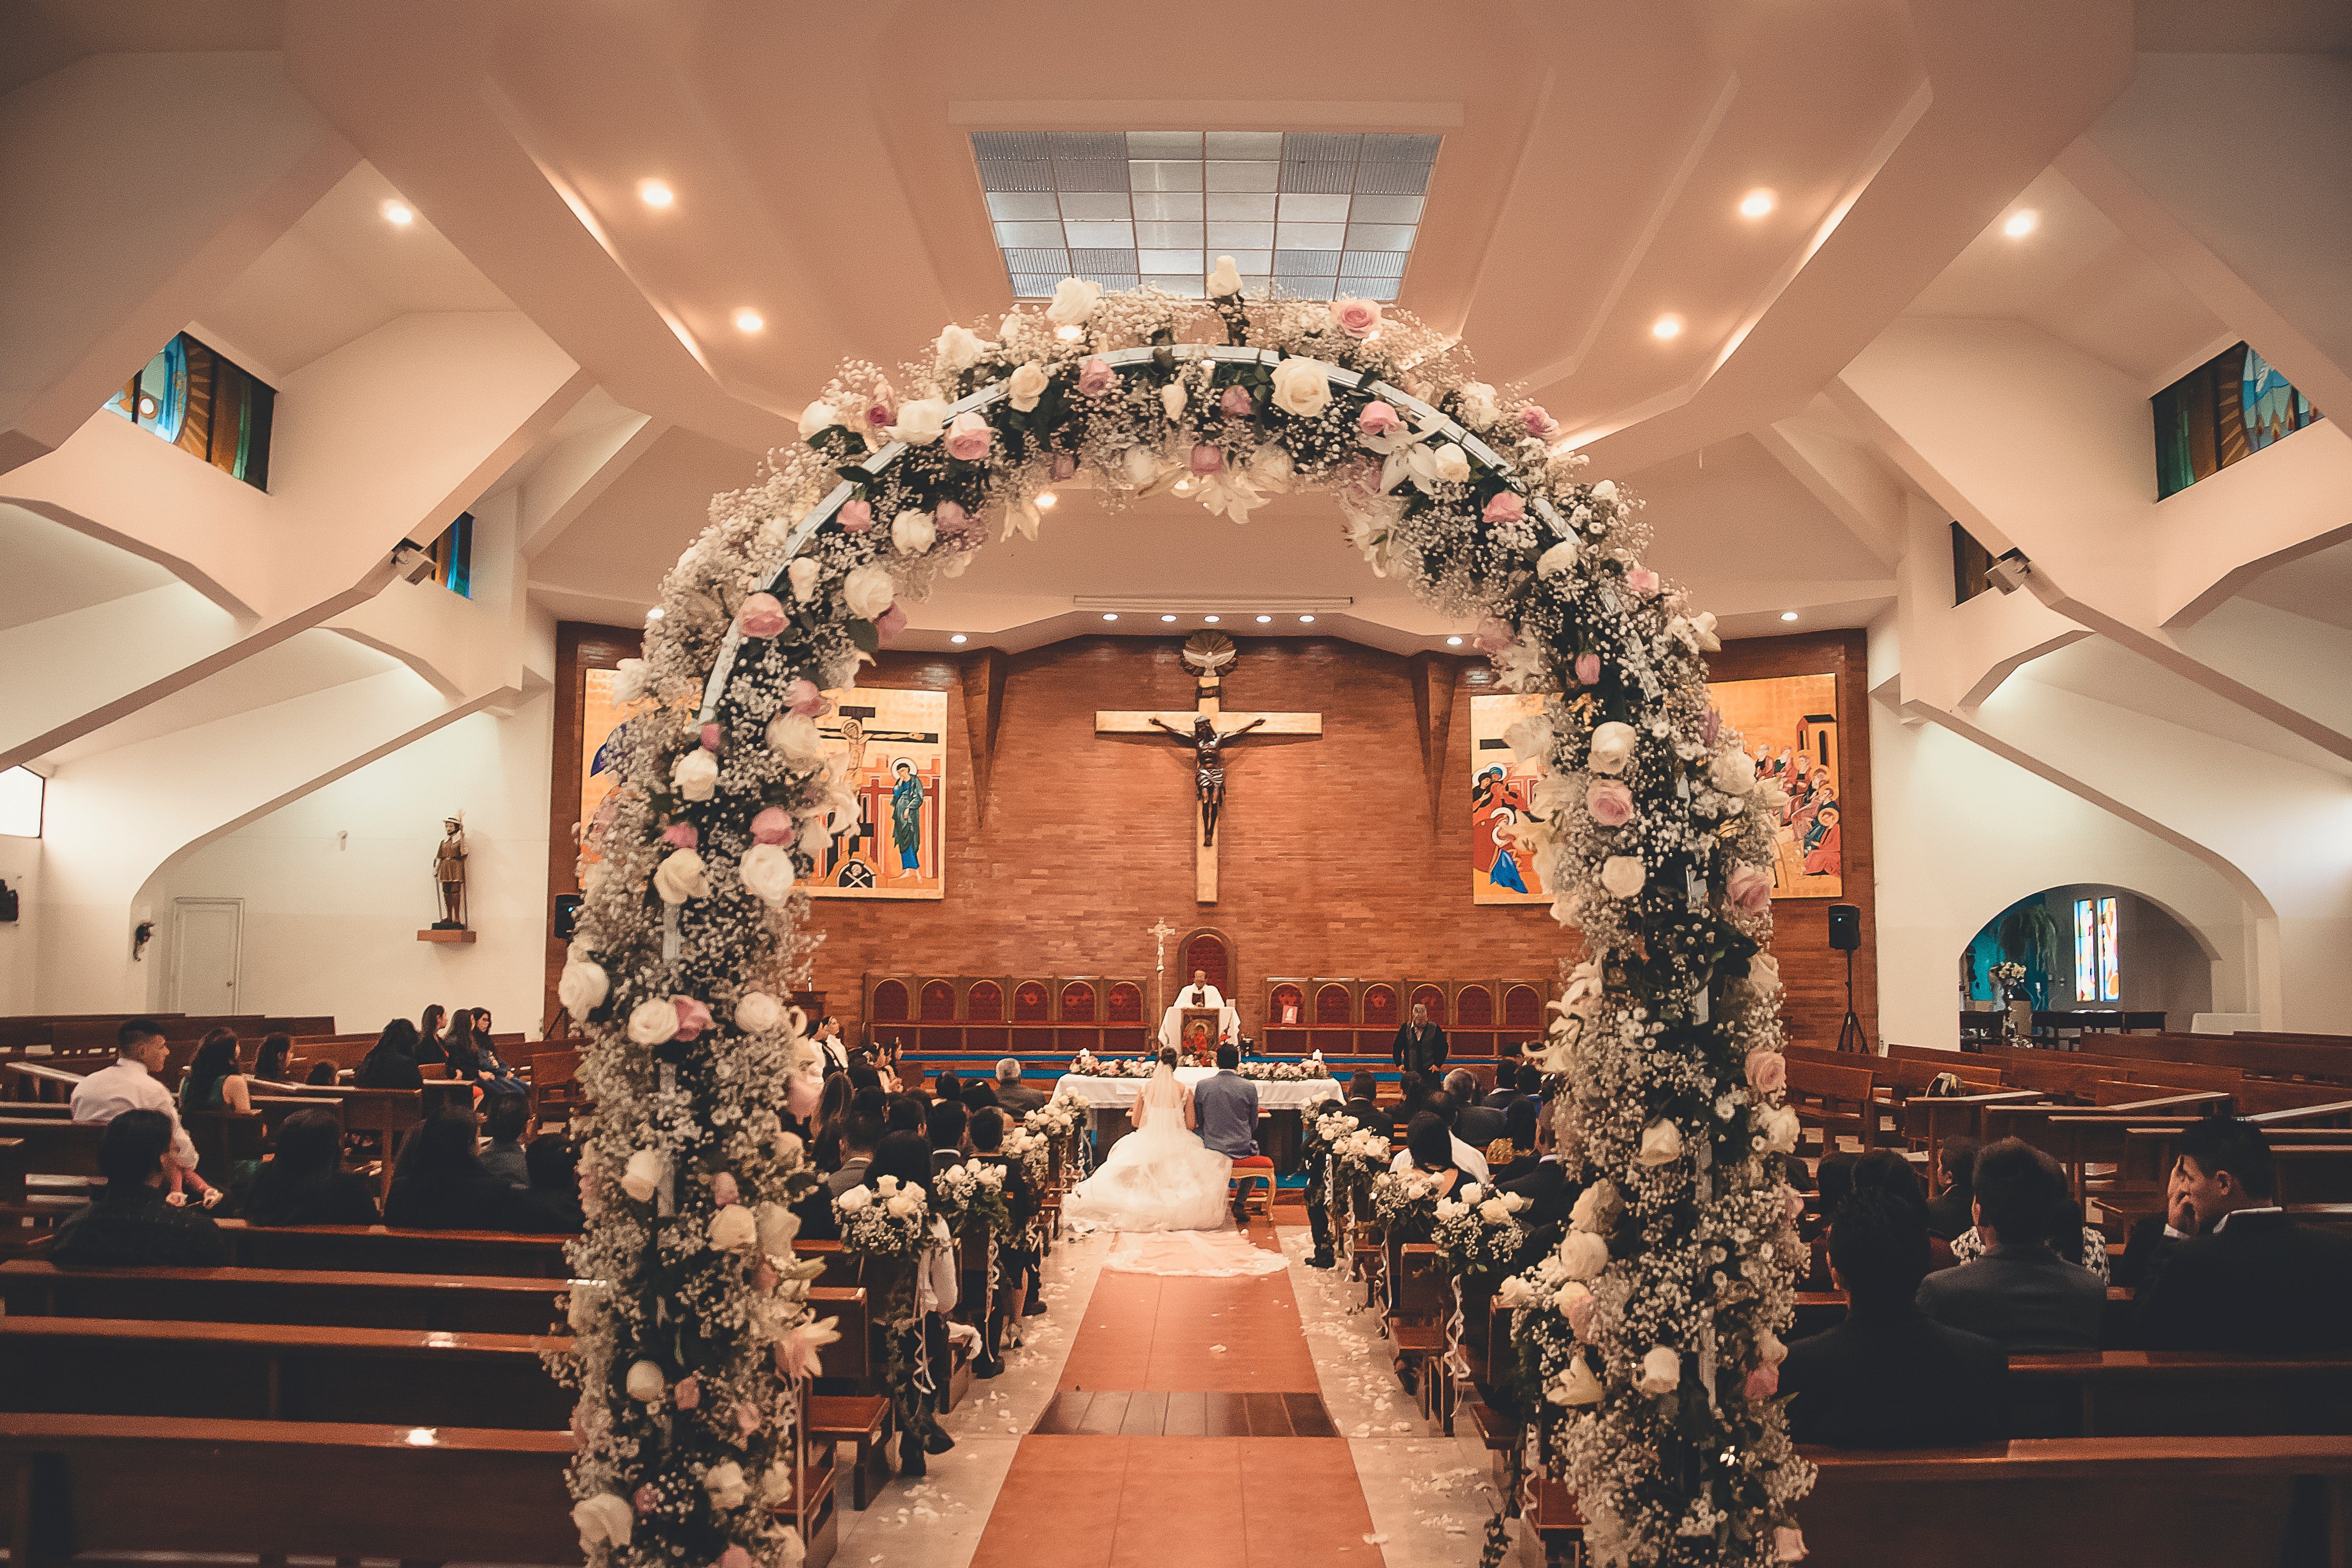 Bride and Groom Inside the Church With Wedding Setup · Free